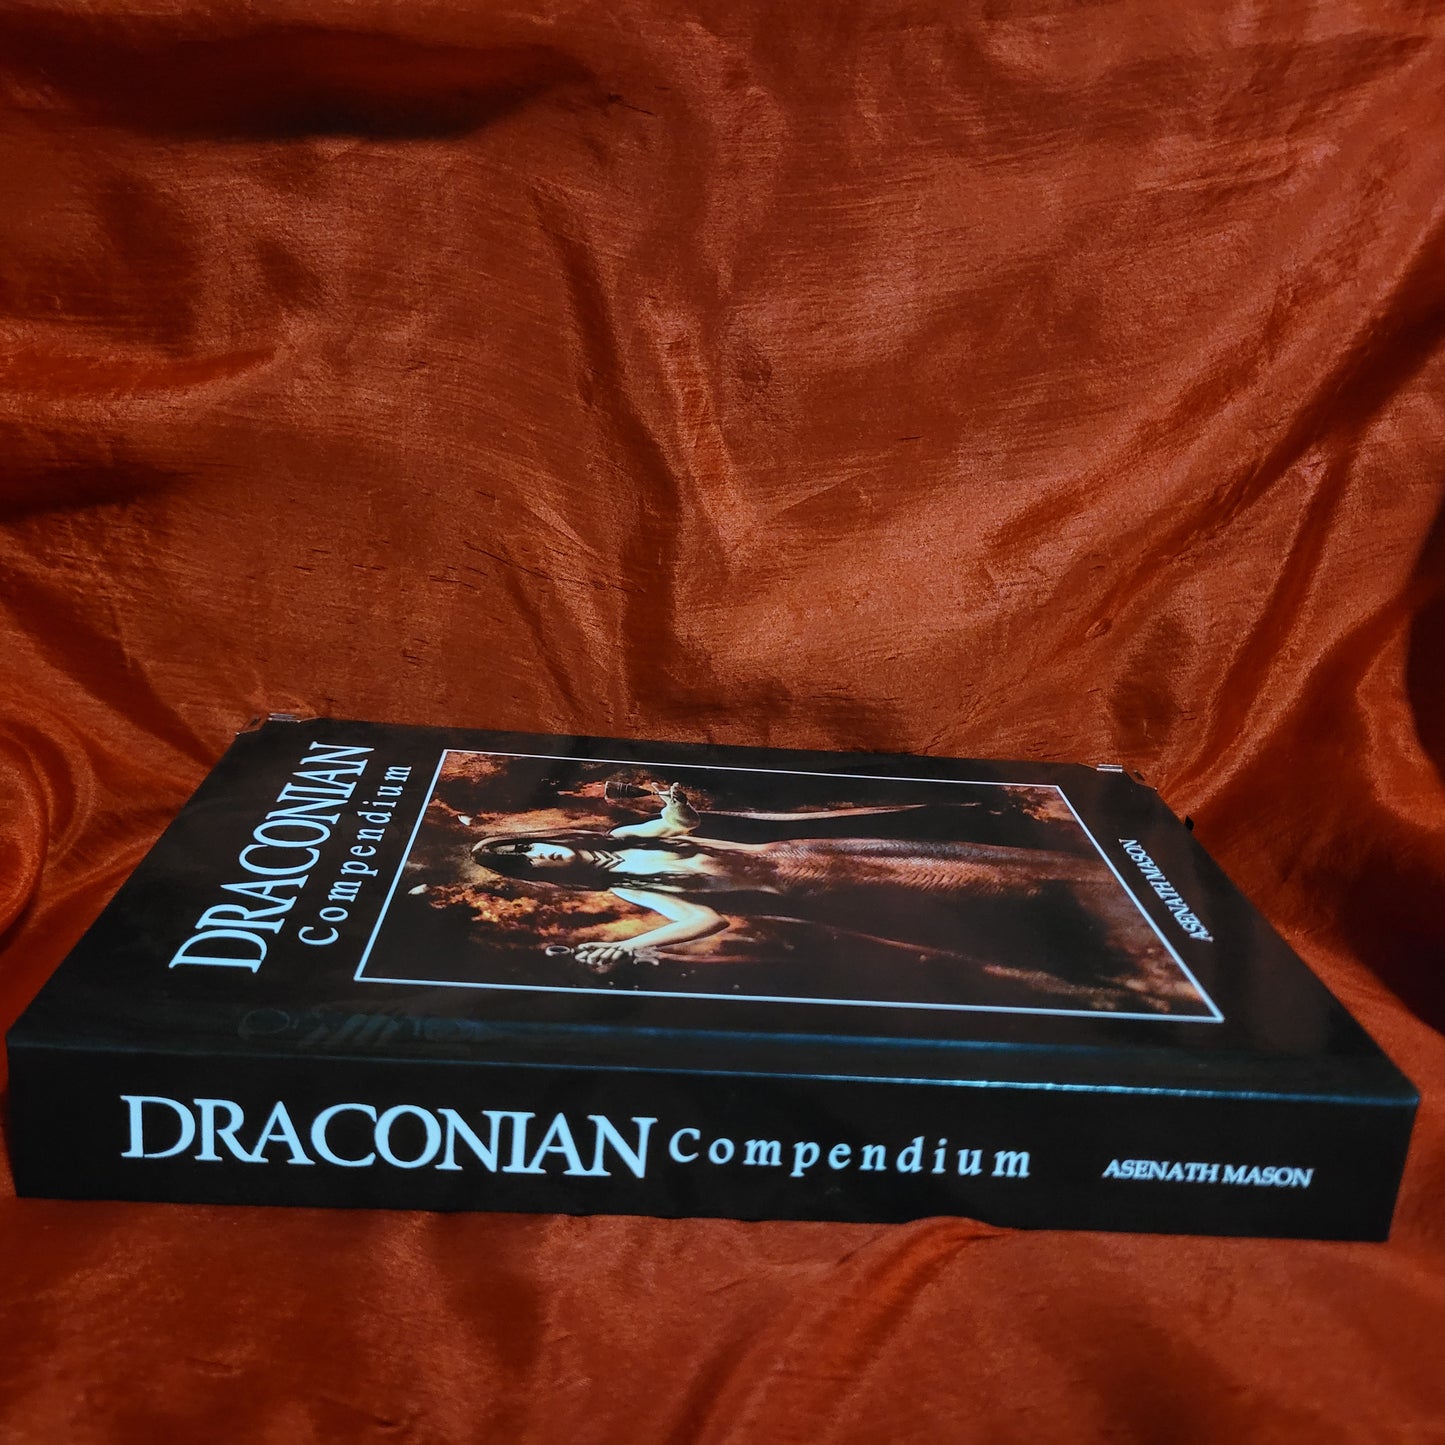 Draconian Compendium by Asenath Mason (Sirius Limited Esoterica, 2024) Hardcover Limited to 111 Copies